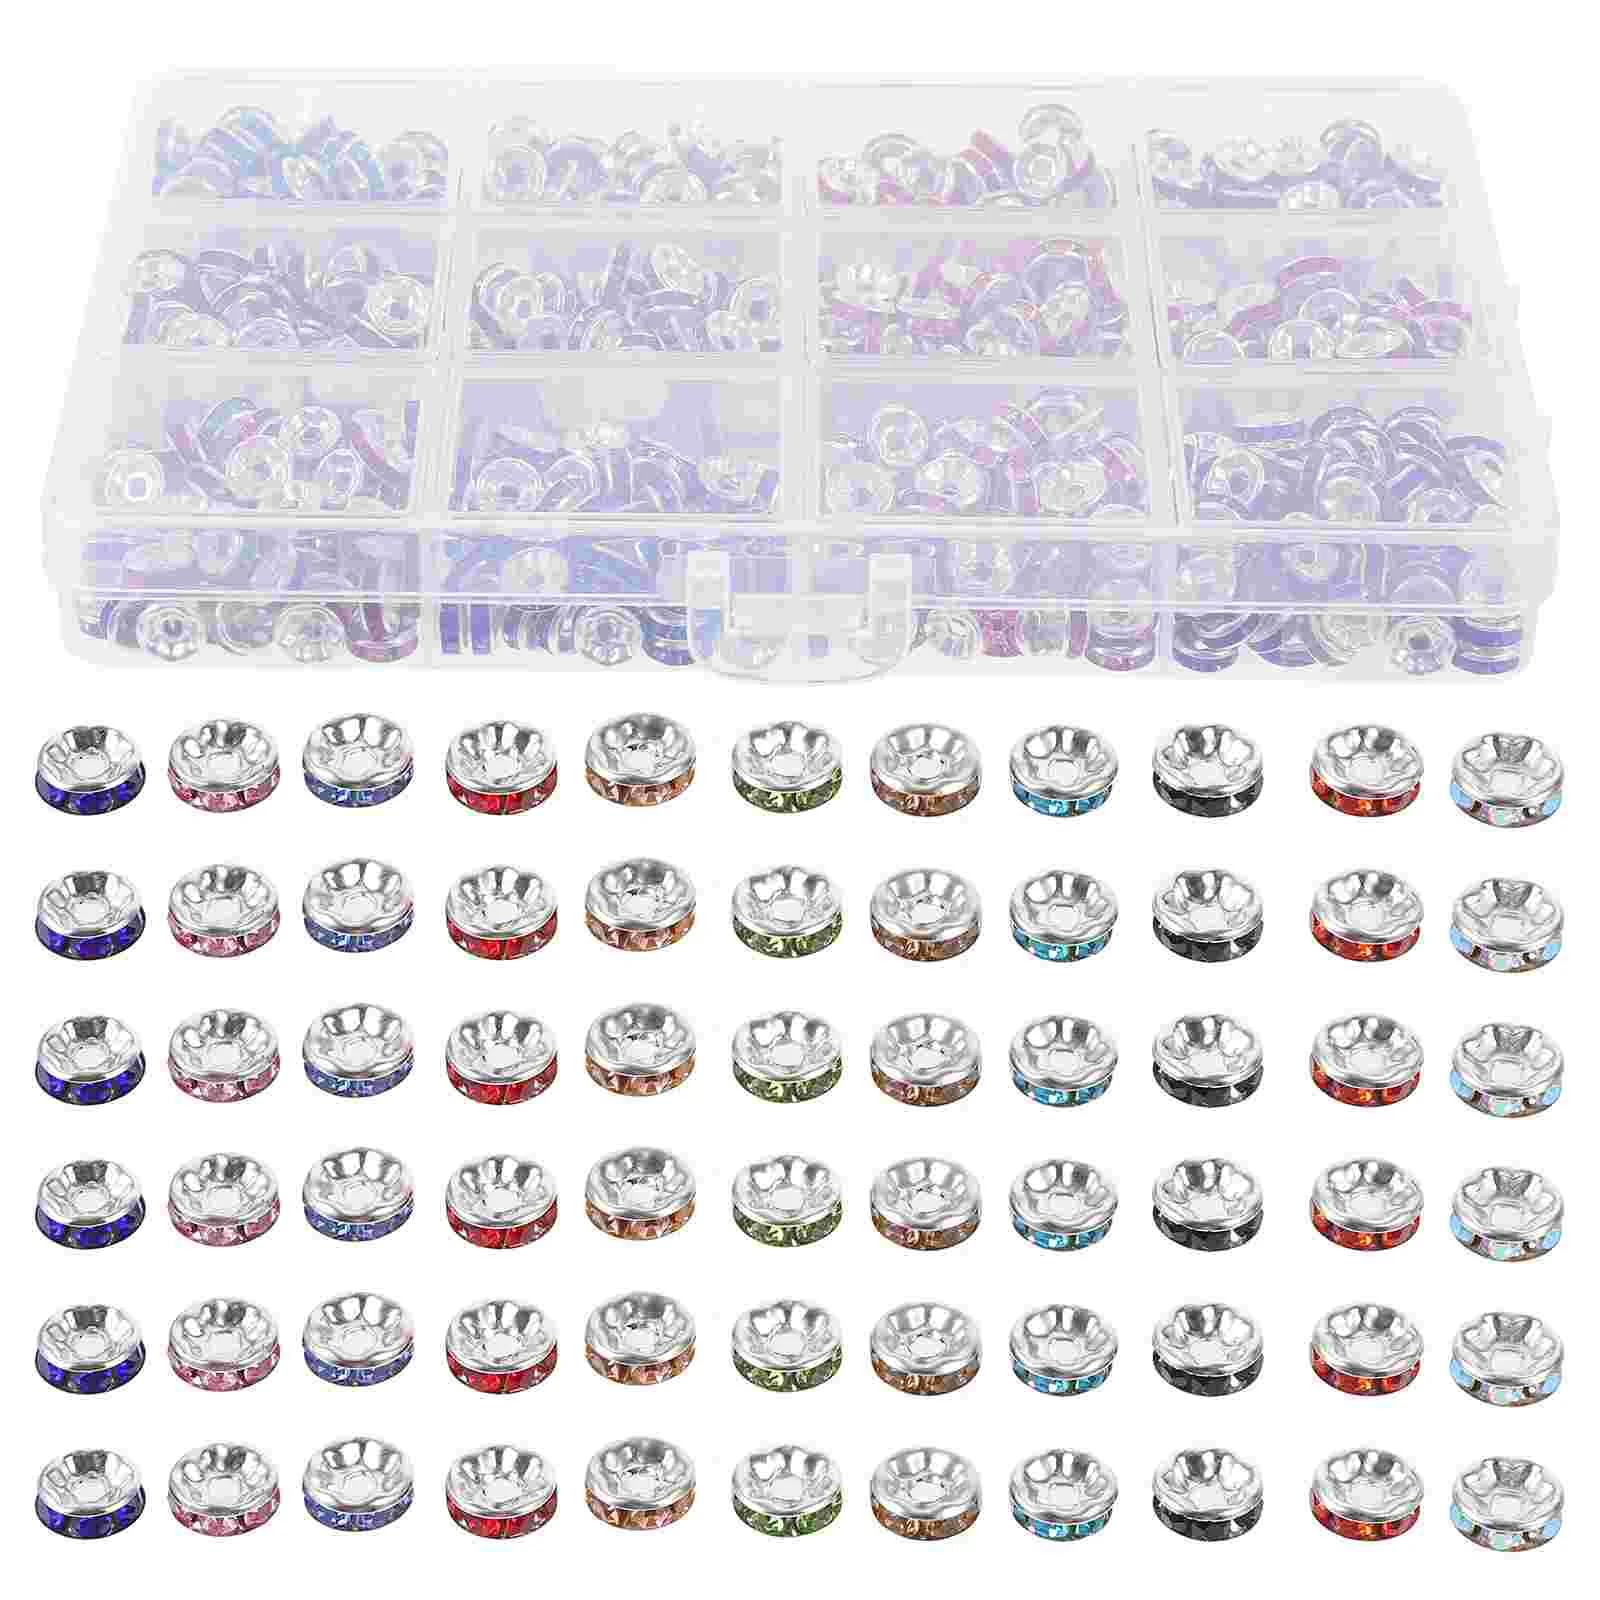 

720 Pcs Spacer Beads DIY Craft Jewels Accessories Garland Abs Jewelry Making Loose